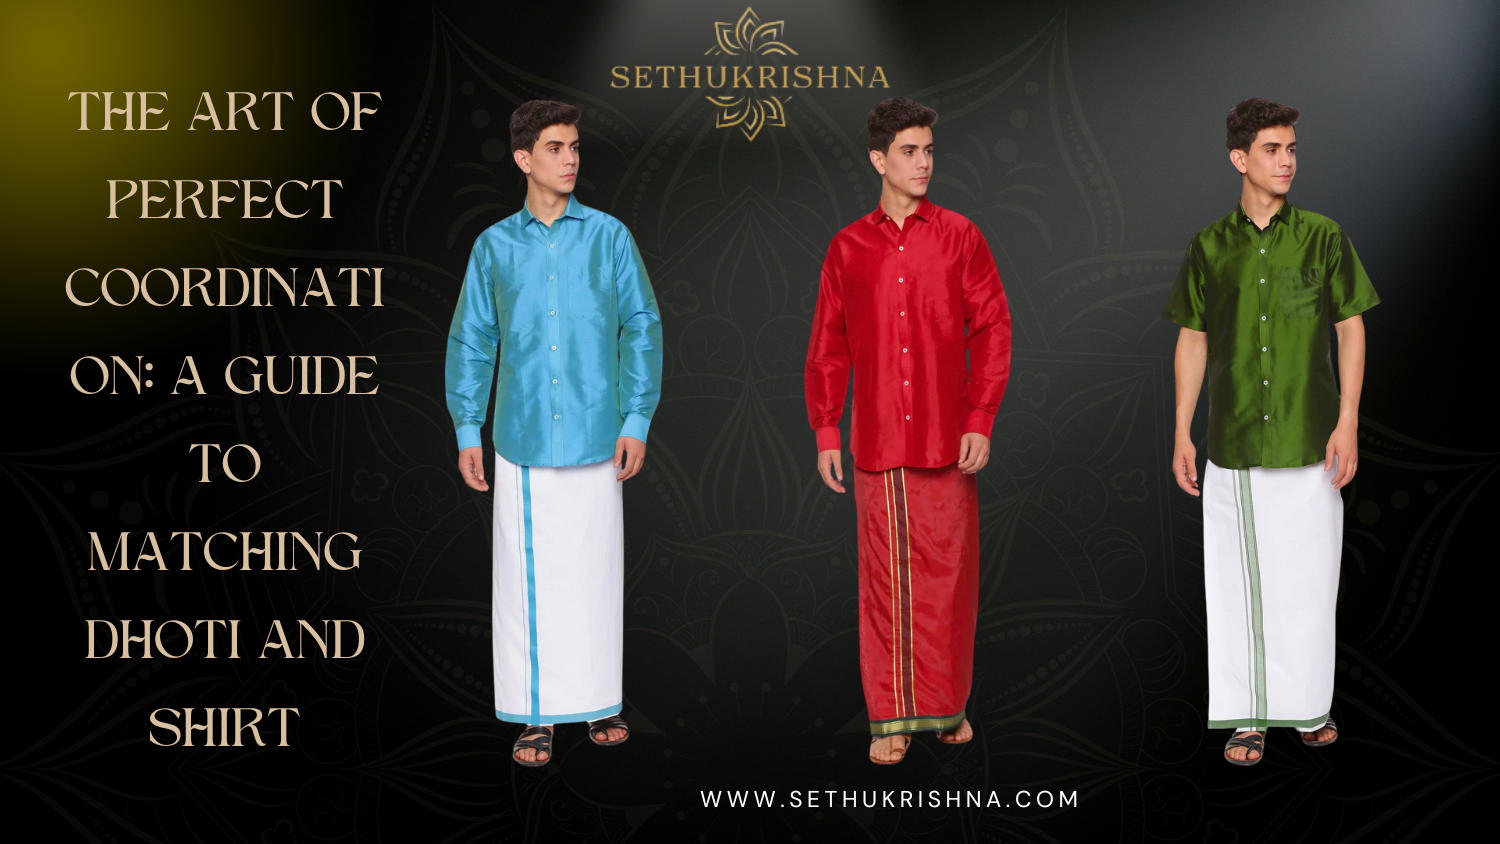 A Guide to Matching Dhoti and Shirt